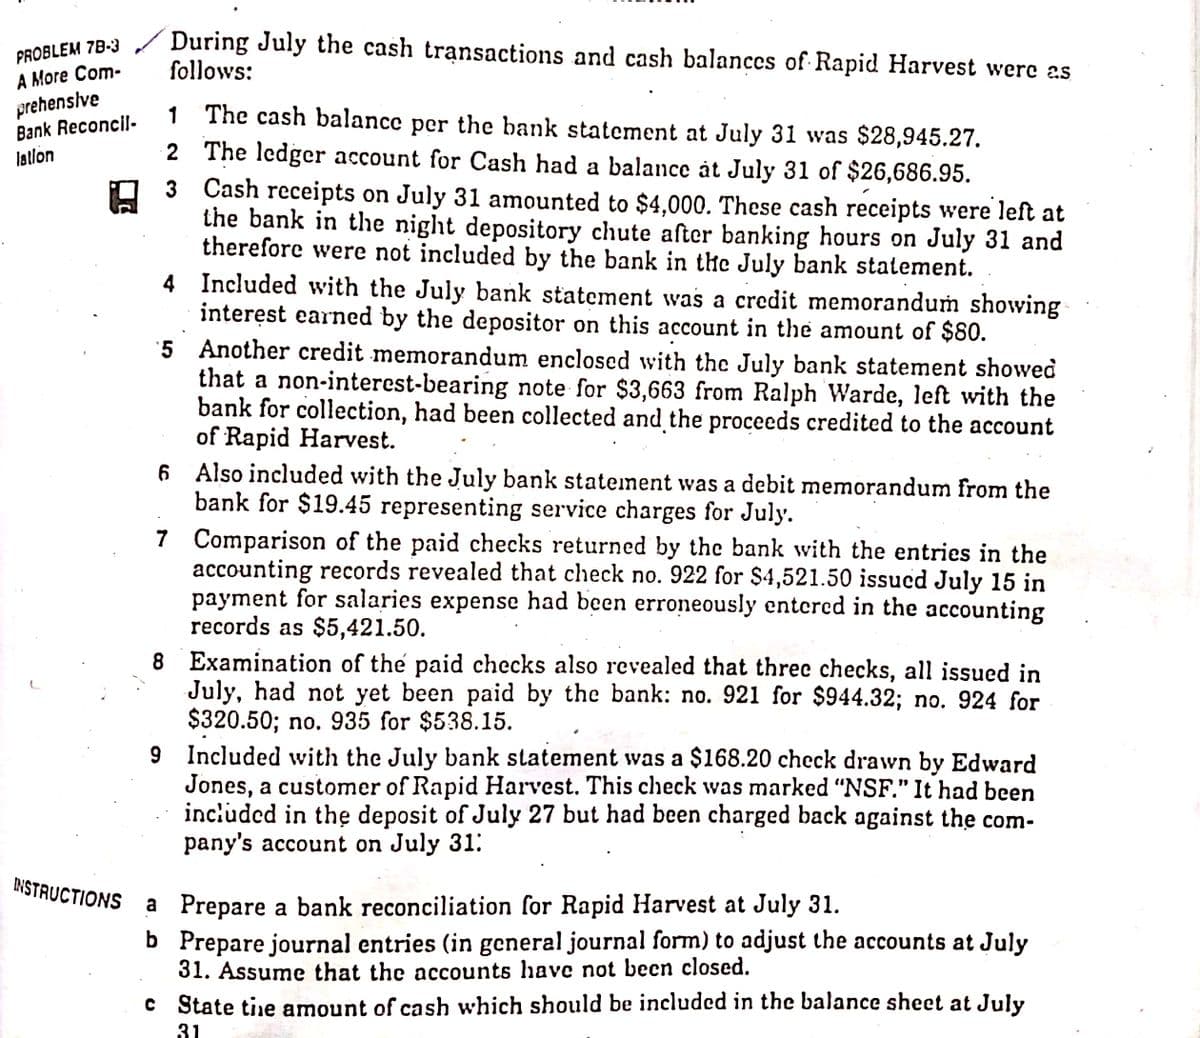 During July the cash transactions and cash balances of Rapid Harvest were as
follows:
PROBLEM 78-3
A More Com-
prehensive
Bank Reconcil.
latlon
1 The cash balance per the bank statement at July 31 was $28,945.27.
2 The ledger account for Cash had a balance àt July 31 of $26,686.95.
3 Cash receipts on July 31 amounted to $4,000. These cash receipts were left at
the bank in the night depository chute after banking hours on July 31 and
therefore were not included by the bank in the July bank statement.
4 Included with the July bank statement was a credit memoranduṁ showing
interęst earned by the depositor on this account in the amount of $80.
'5 Another credit memorandum enclosed with the July bank statement showed
that a non-interest-bearing note for $3,663 from Ralph Warde, left with the
bank for collection, had been collected and the proceeds credited to the account
of Rapid Harvest.
6 Also included with the July bank statement was a debit memorandum from the
bank for $19.45 representing service charges for July.
7 Comparison of the paid checks returned by the bank with the entries in the
accounting records revealed that check no. 922 for $4,521.50 issucd July 15 in
payment for salaries expense had been erroneously entcred in the accounting
records as $5,421.50.
8 Examination of the paid checks also revealed that three checks, all issued in
July, had not yet been paid by the bank: no. 921 for $944.32; no. 924 for
$320.50; no. 935 for $538.15.
9 Included with the July bank statement was a $168.20 check drawn by Edward
Jones, a customer of Rapid Harvest. This check was marked "NSF." It had been
included in thẹ deposit of July 27 but had been charged back against the com-
pany's account on July 31:
INSTRUCTIONS
a Prepare a bank reconciliation for Rapid Harvest at July 31.
b Prepare journal entries (in general journal form) to adjust the accounts at July
31. Assume that the accounts have not becn closed.
c State tie amount of cash which should be included in the balance sheet at July
31
